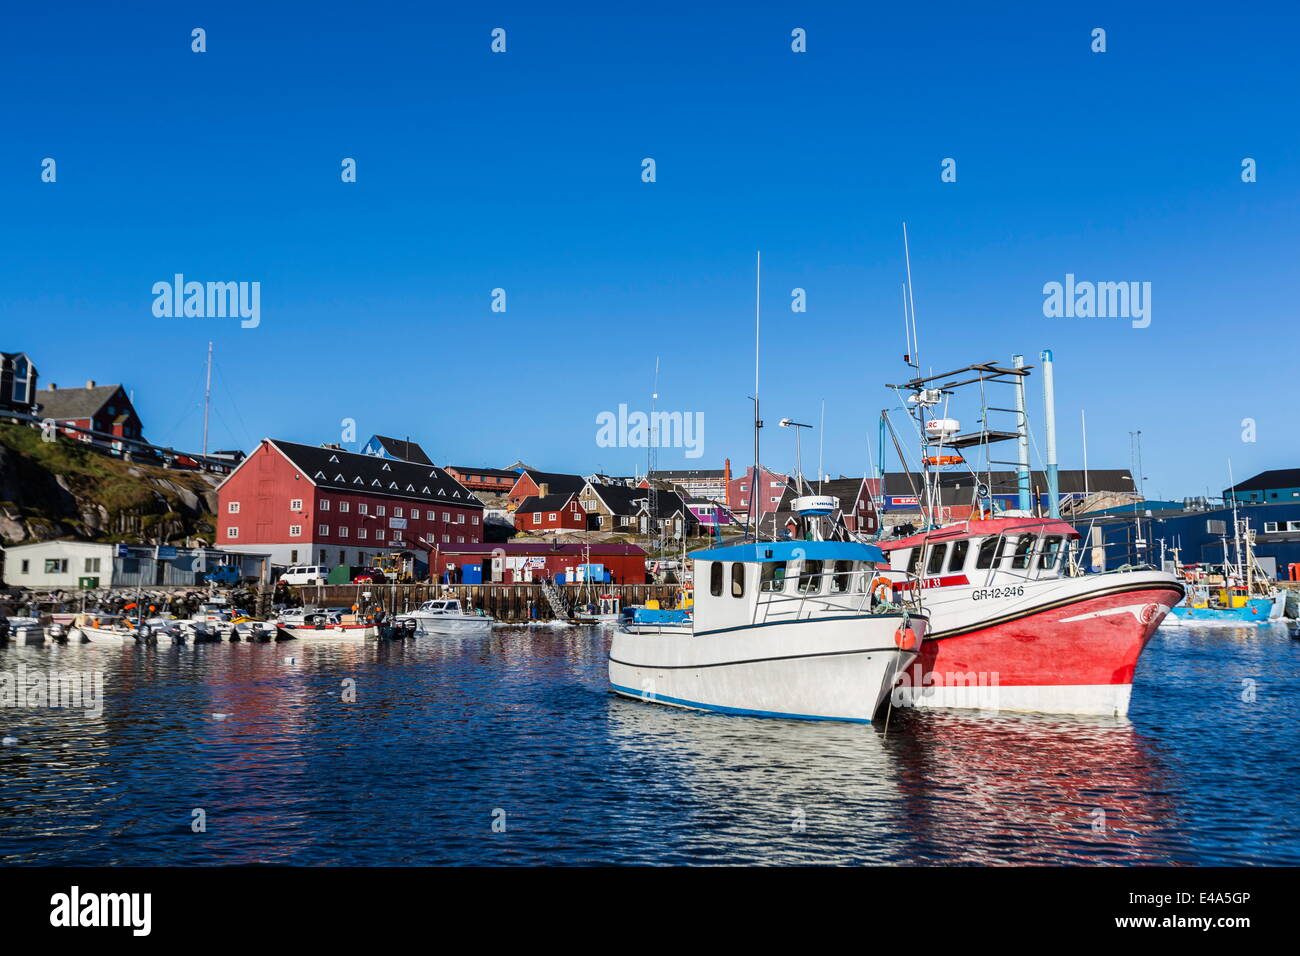 Commercial fishing and whaling boats line the busy inner harbor in the town of Ilulissat, Greenland, Polar Regions Stock Photo